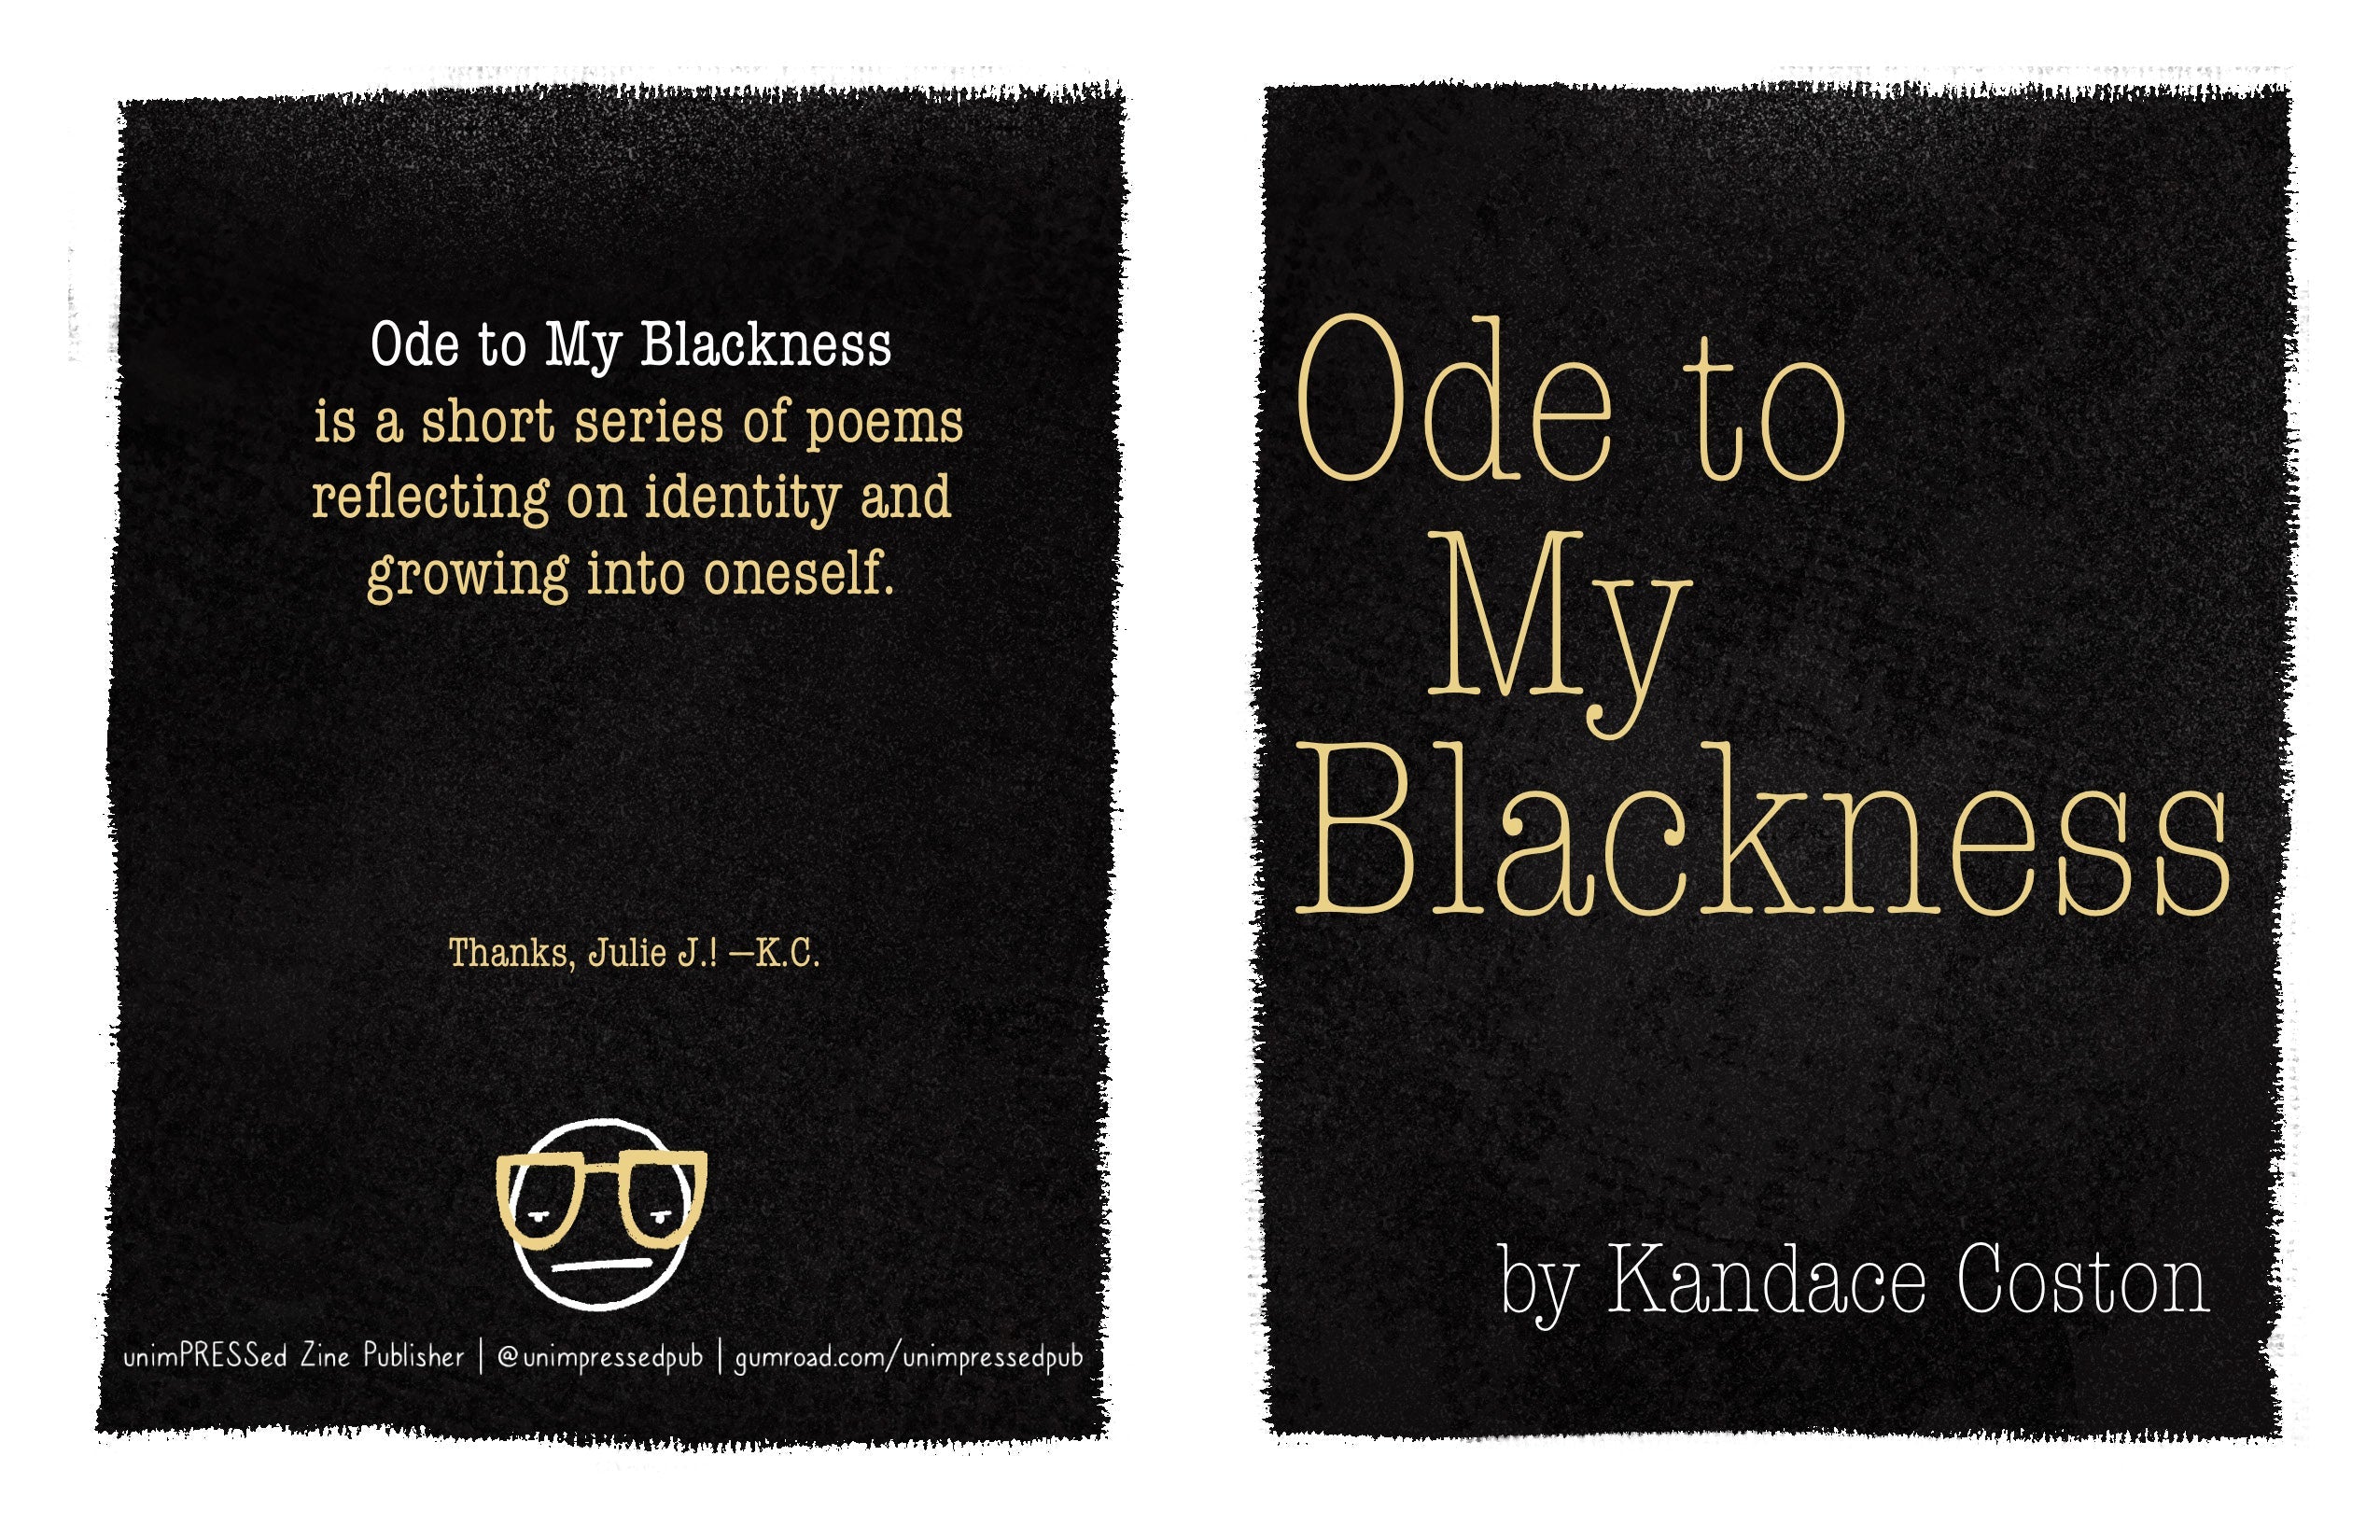 Ode to My Blackness